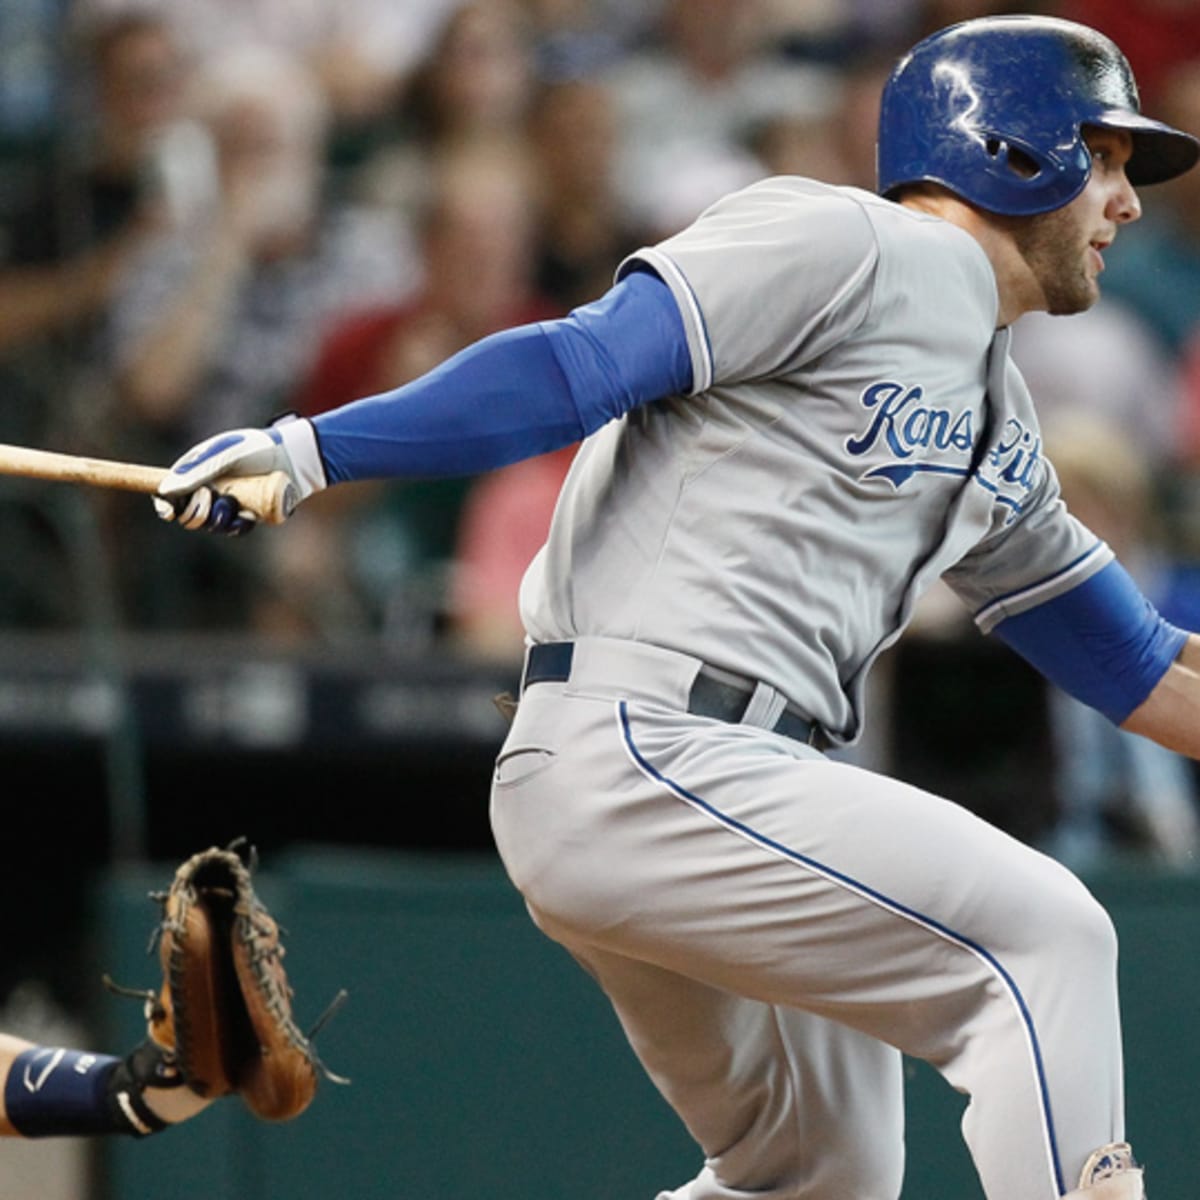 Will Royals' All-Star surge carry Omar Infante, too?